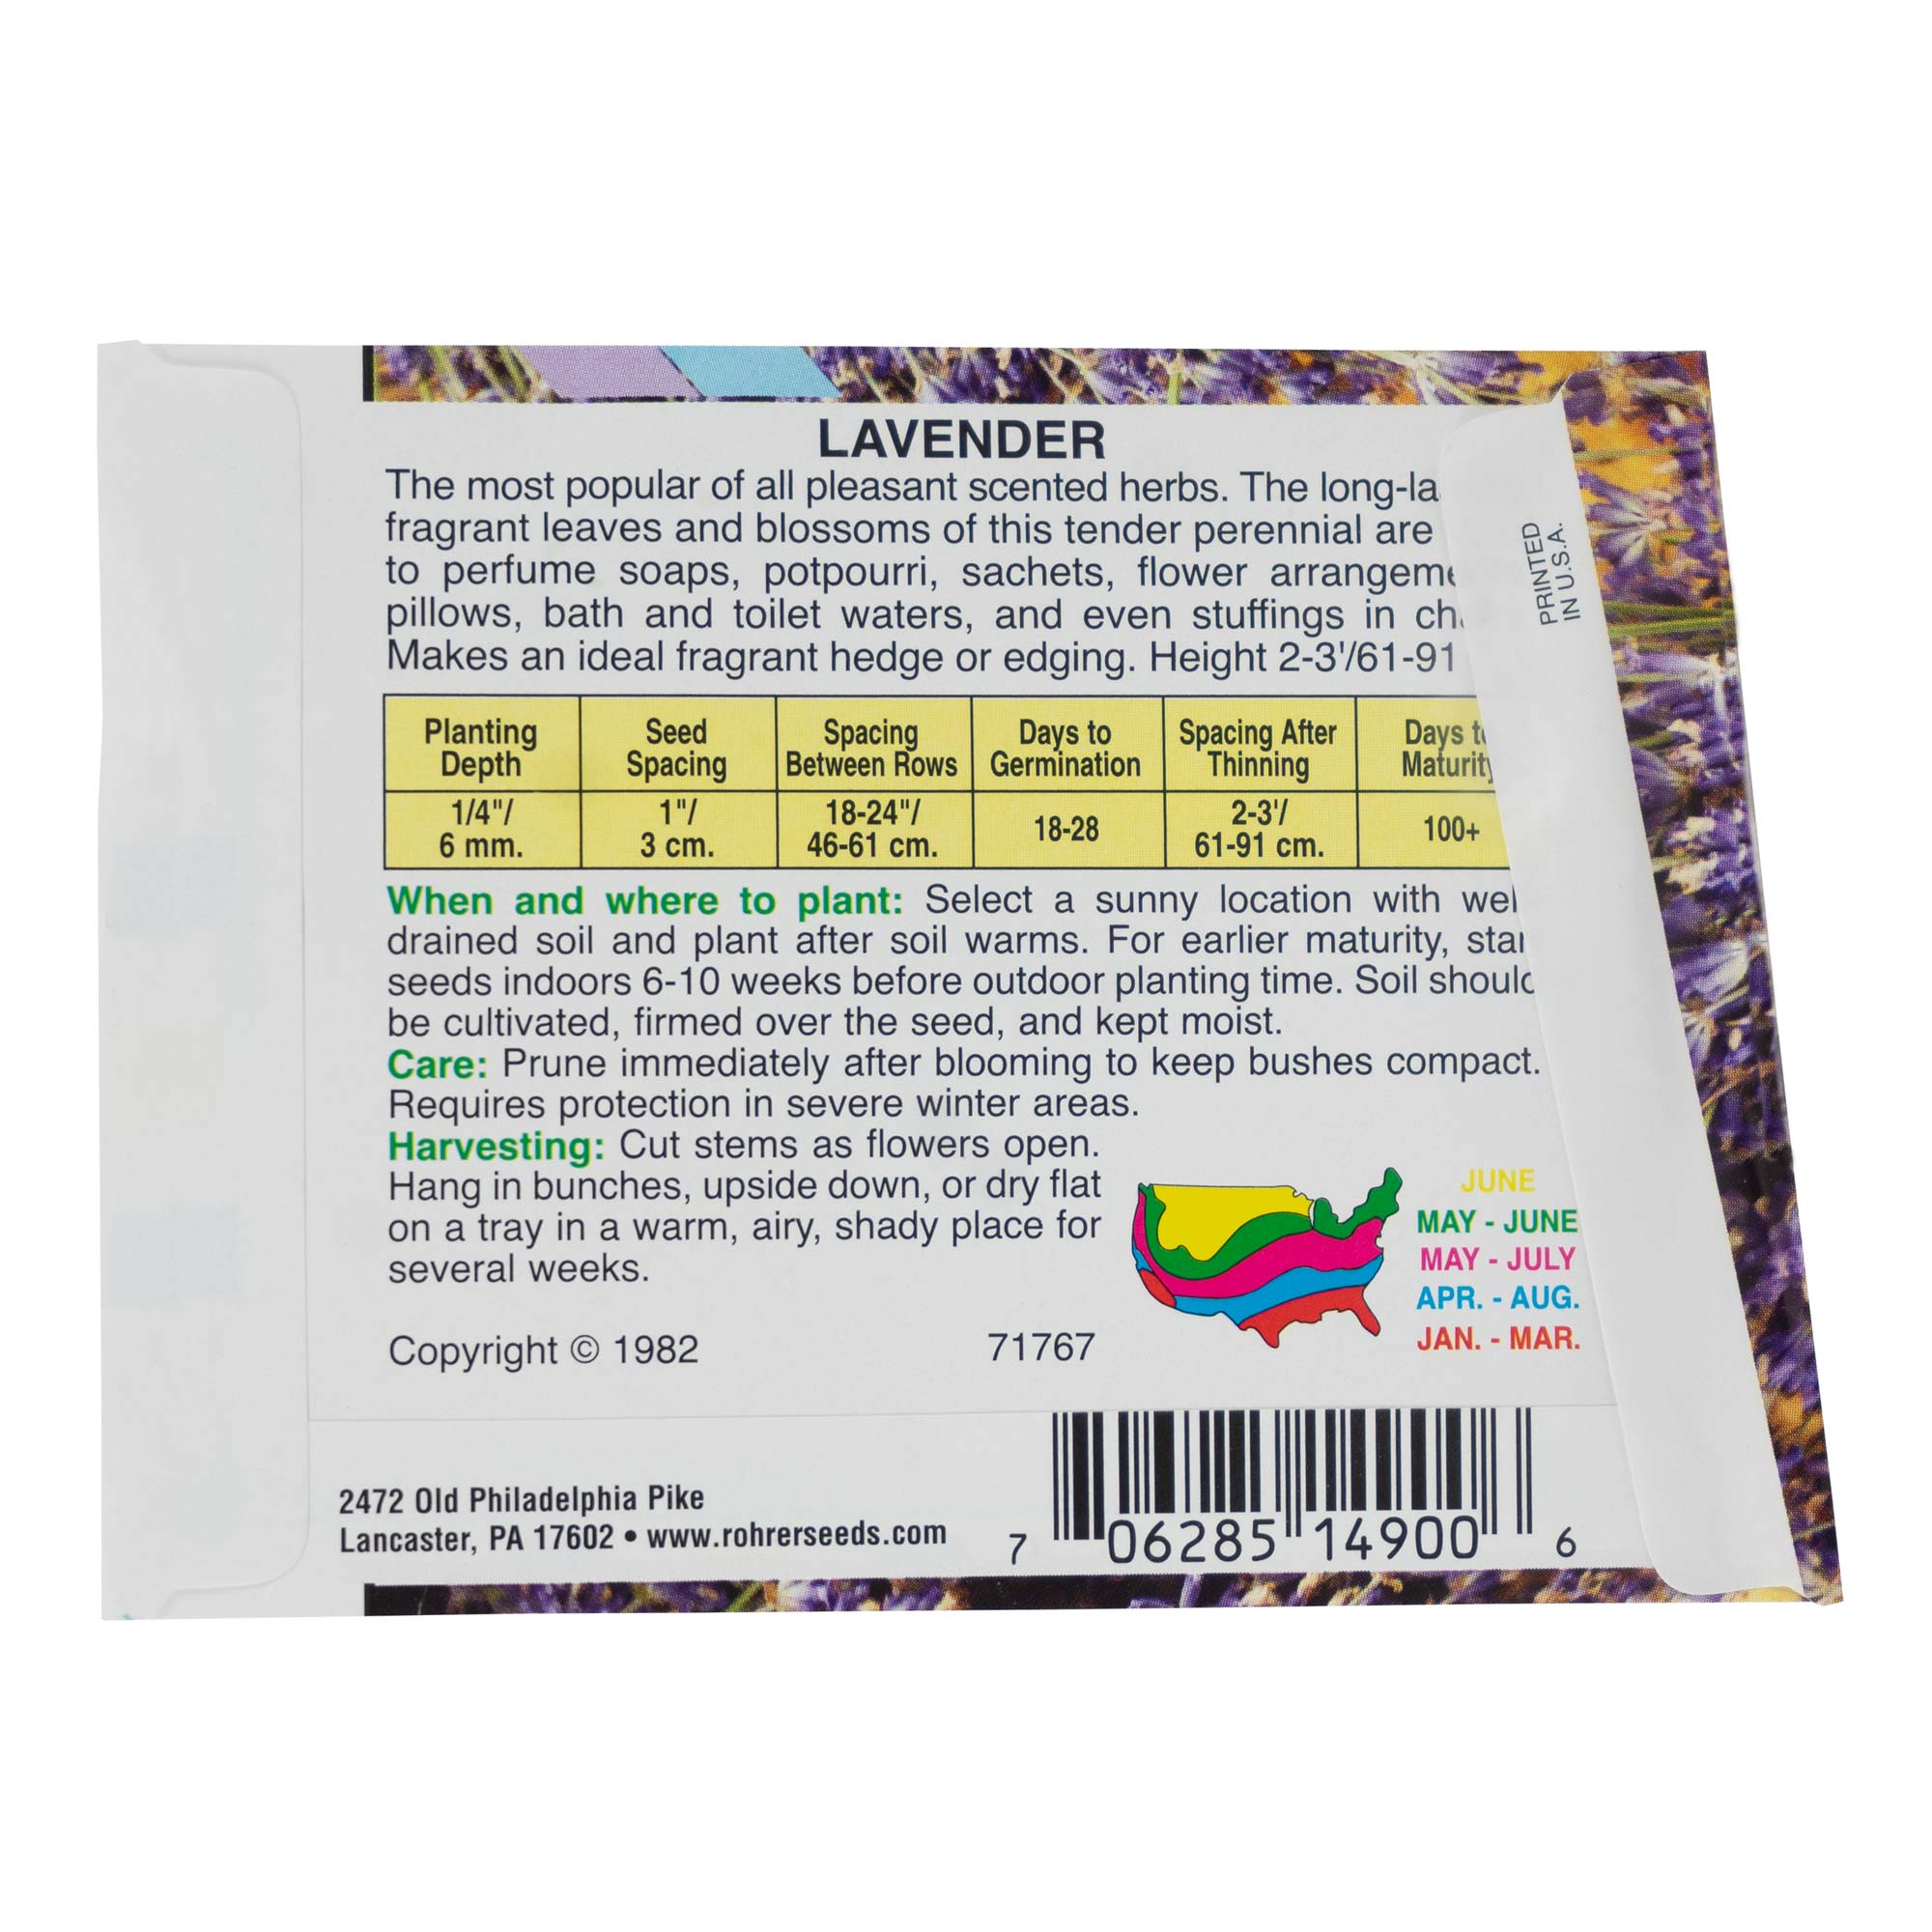 Rohrers Seed Herb Heirloom Non-GMO Lavender Vera Seeds Packet, 250mg (Approx. 300 Seeds/Packet)